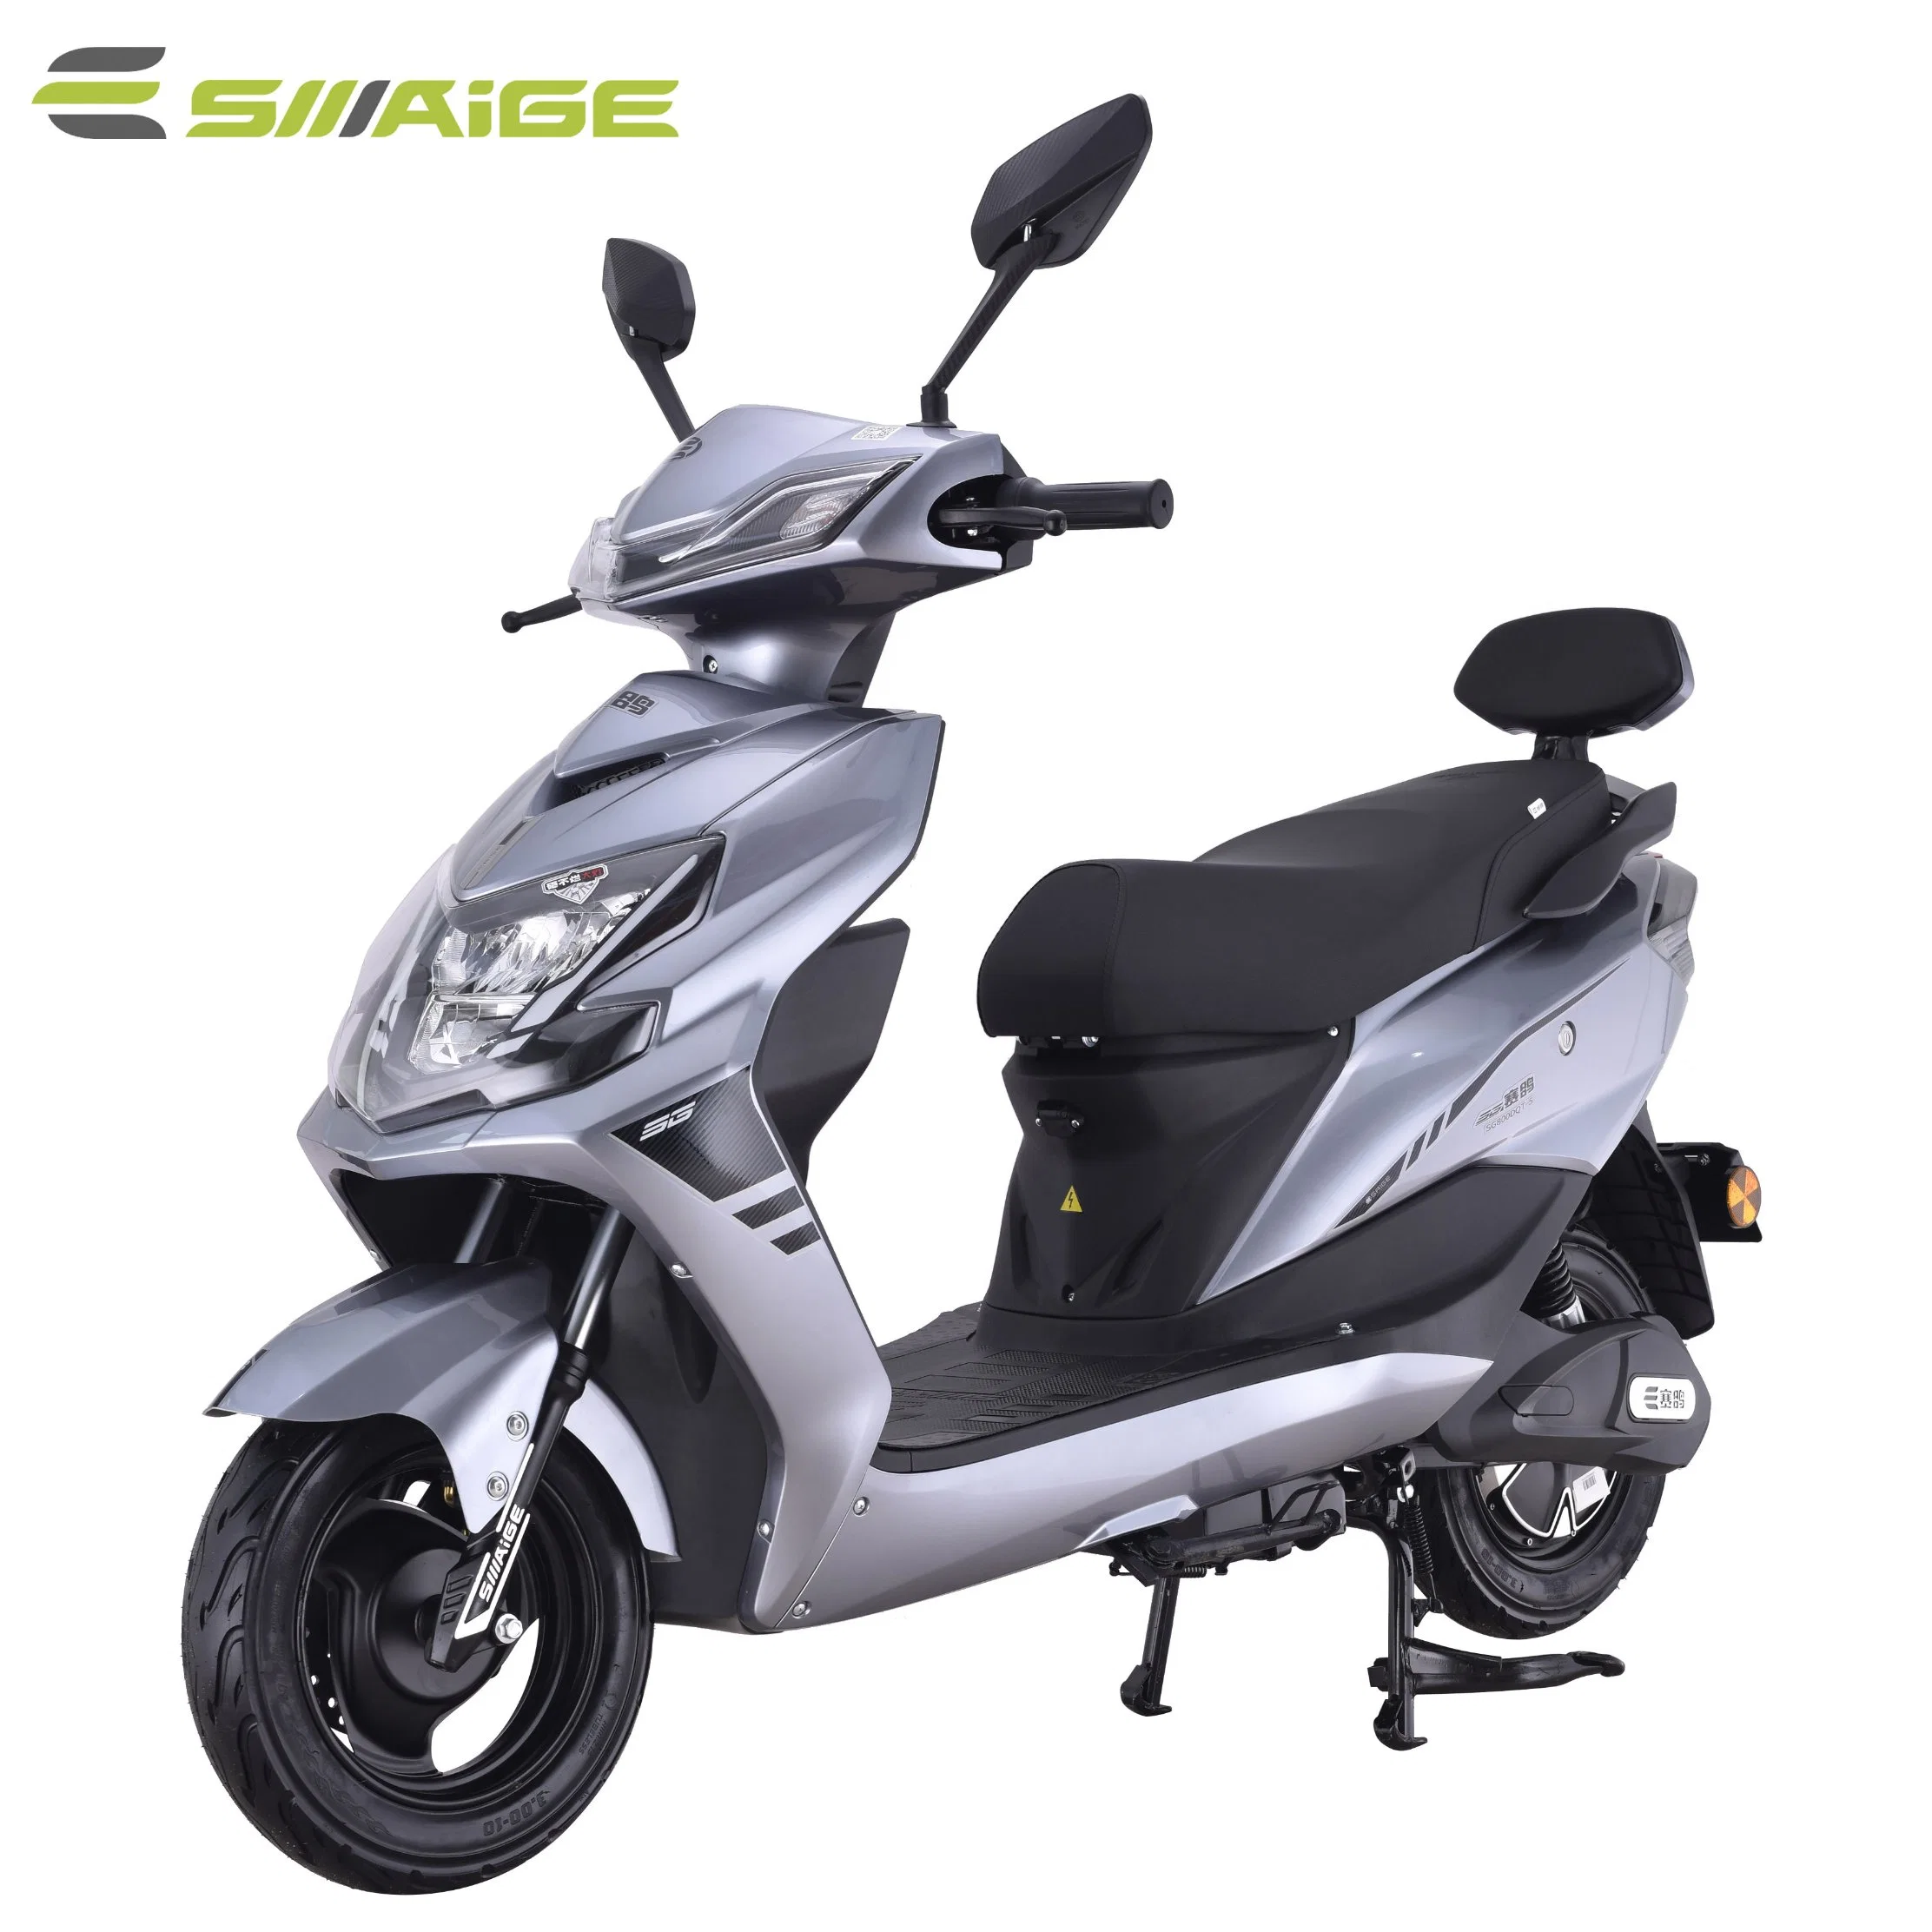 800W Electric Motor Motorcycle Saige EEC Certificate CKD Electric Vehicle Without Battery